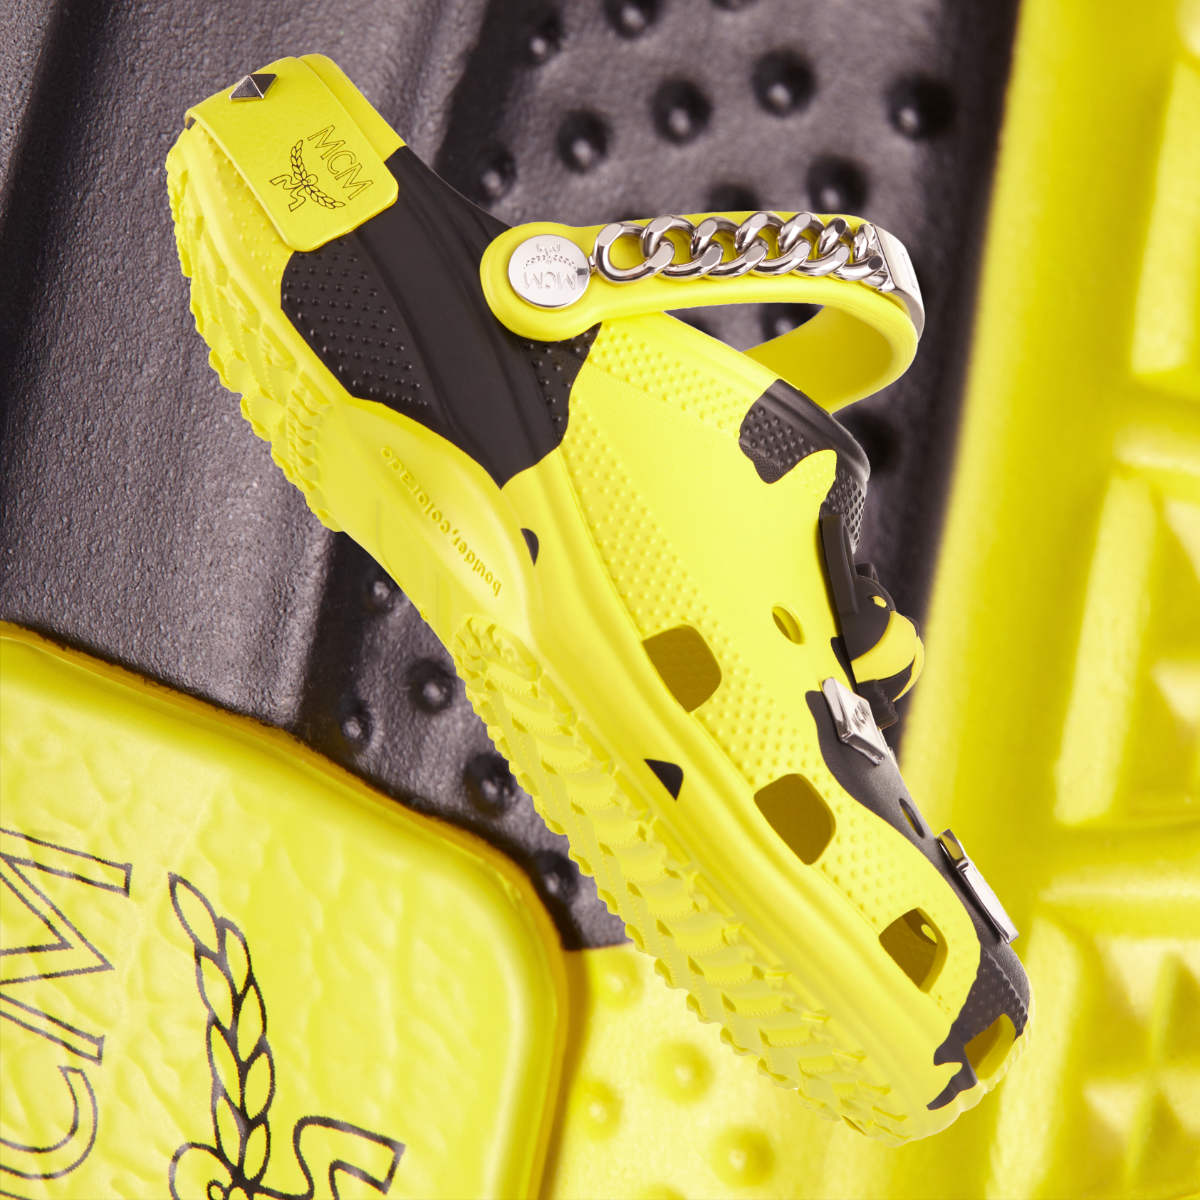 MCM X Crocs Collaborate On Limited-Edition Release